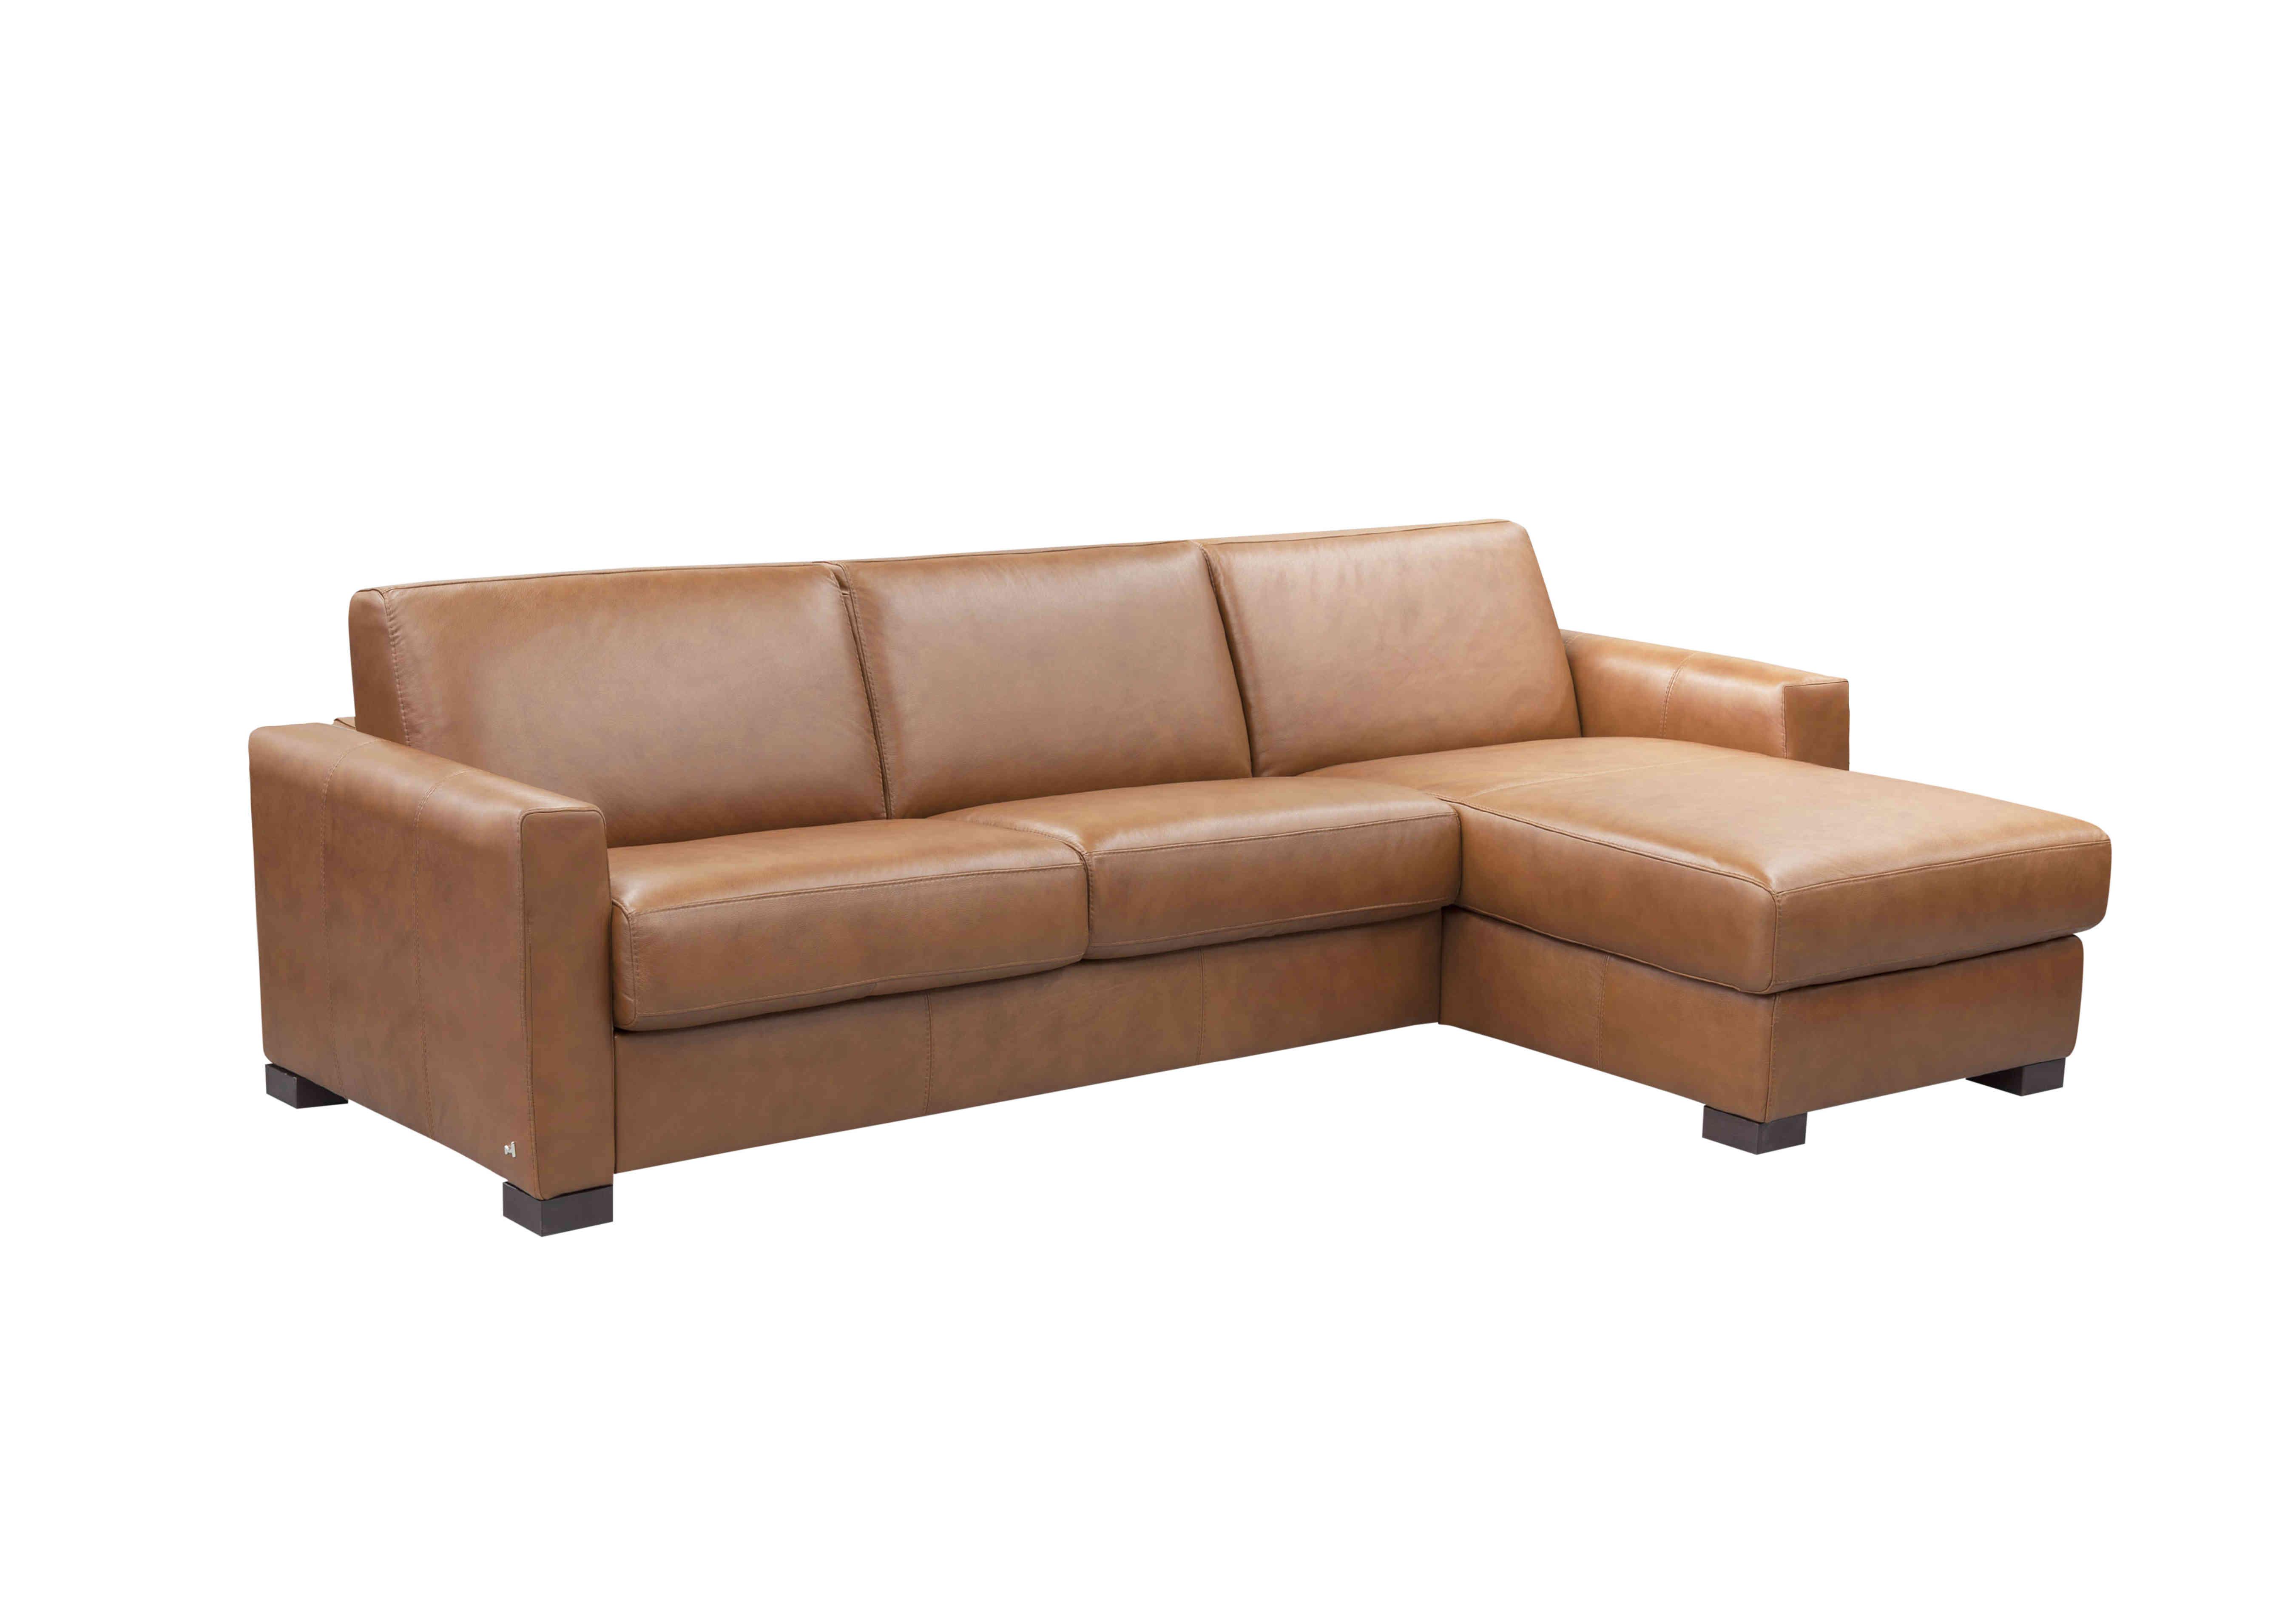 Alcova 3 Seater Leather Sofa Bed with Storage Chaise and Box Arms in Botero Cuoio 2151 on Furniture Village